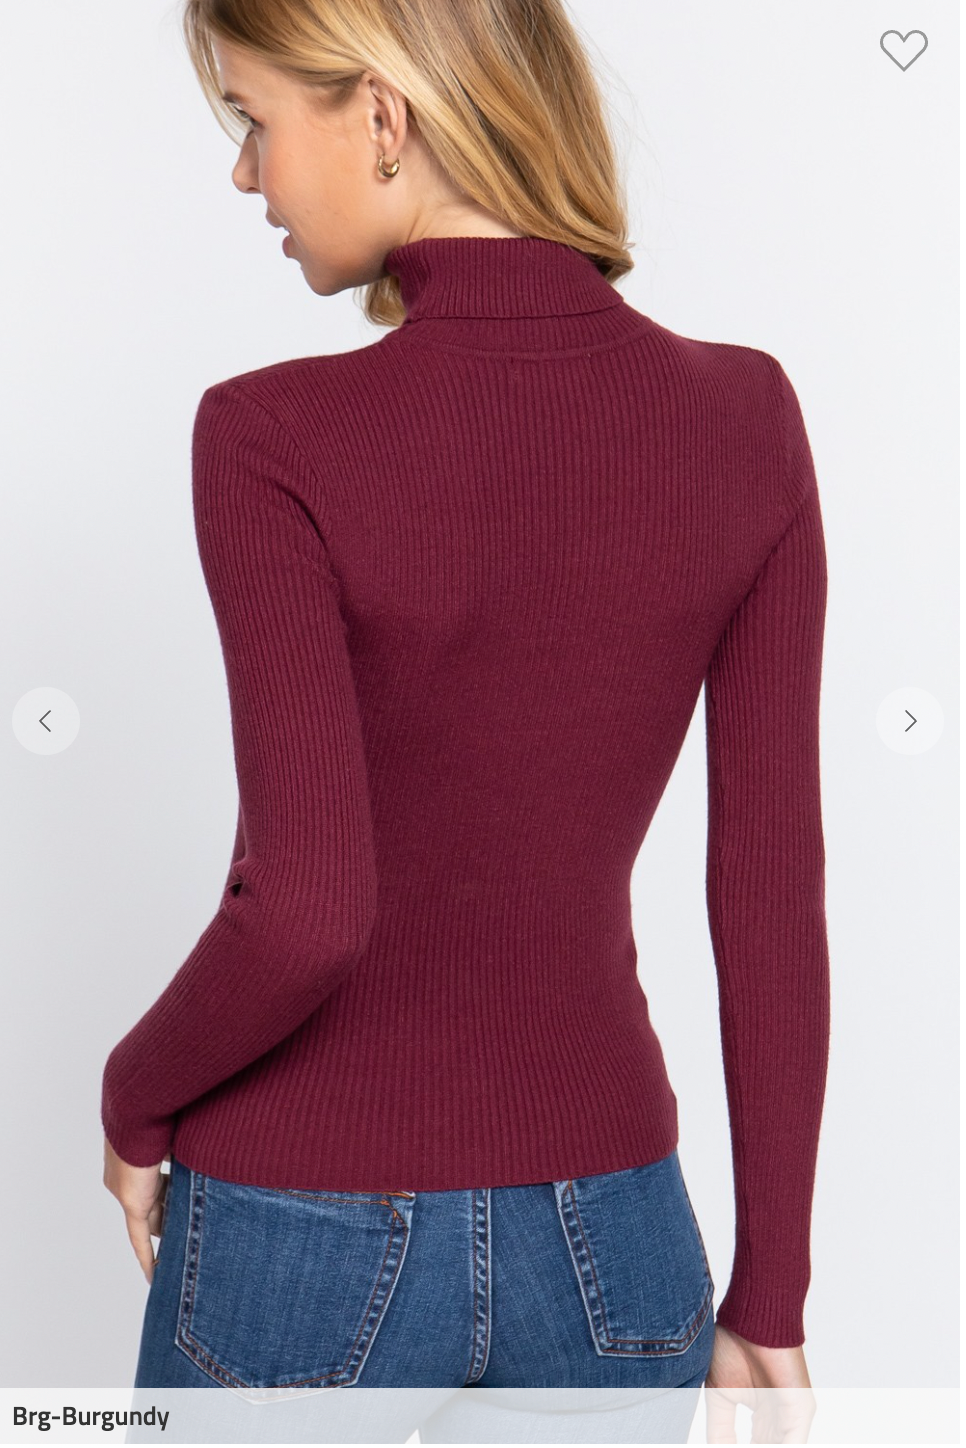 Don't Be Late Turtleneck (Burgundy)